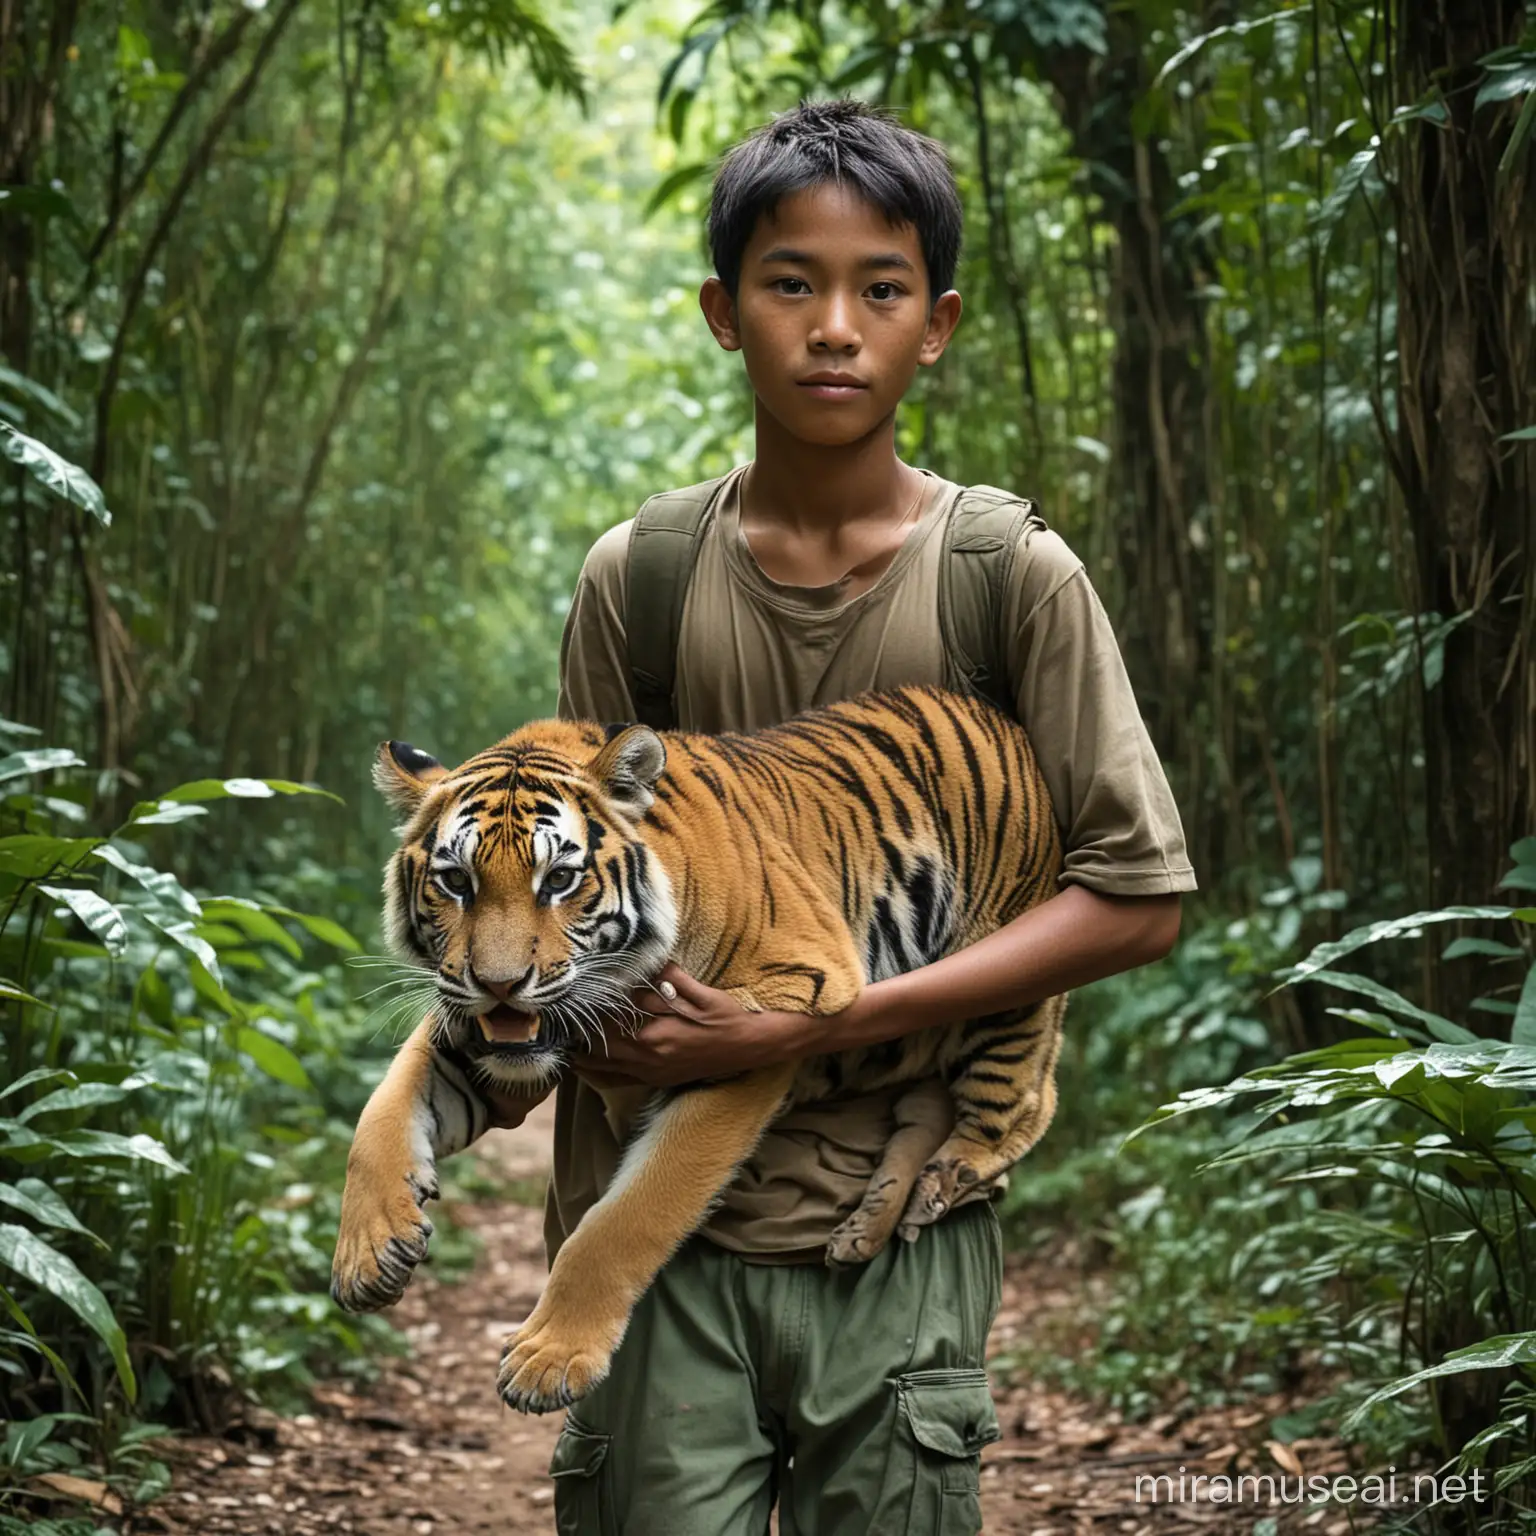 A 17-year-old boy from Indonesia is carrying a baby tiger while in the background is a deep jungle.